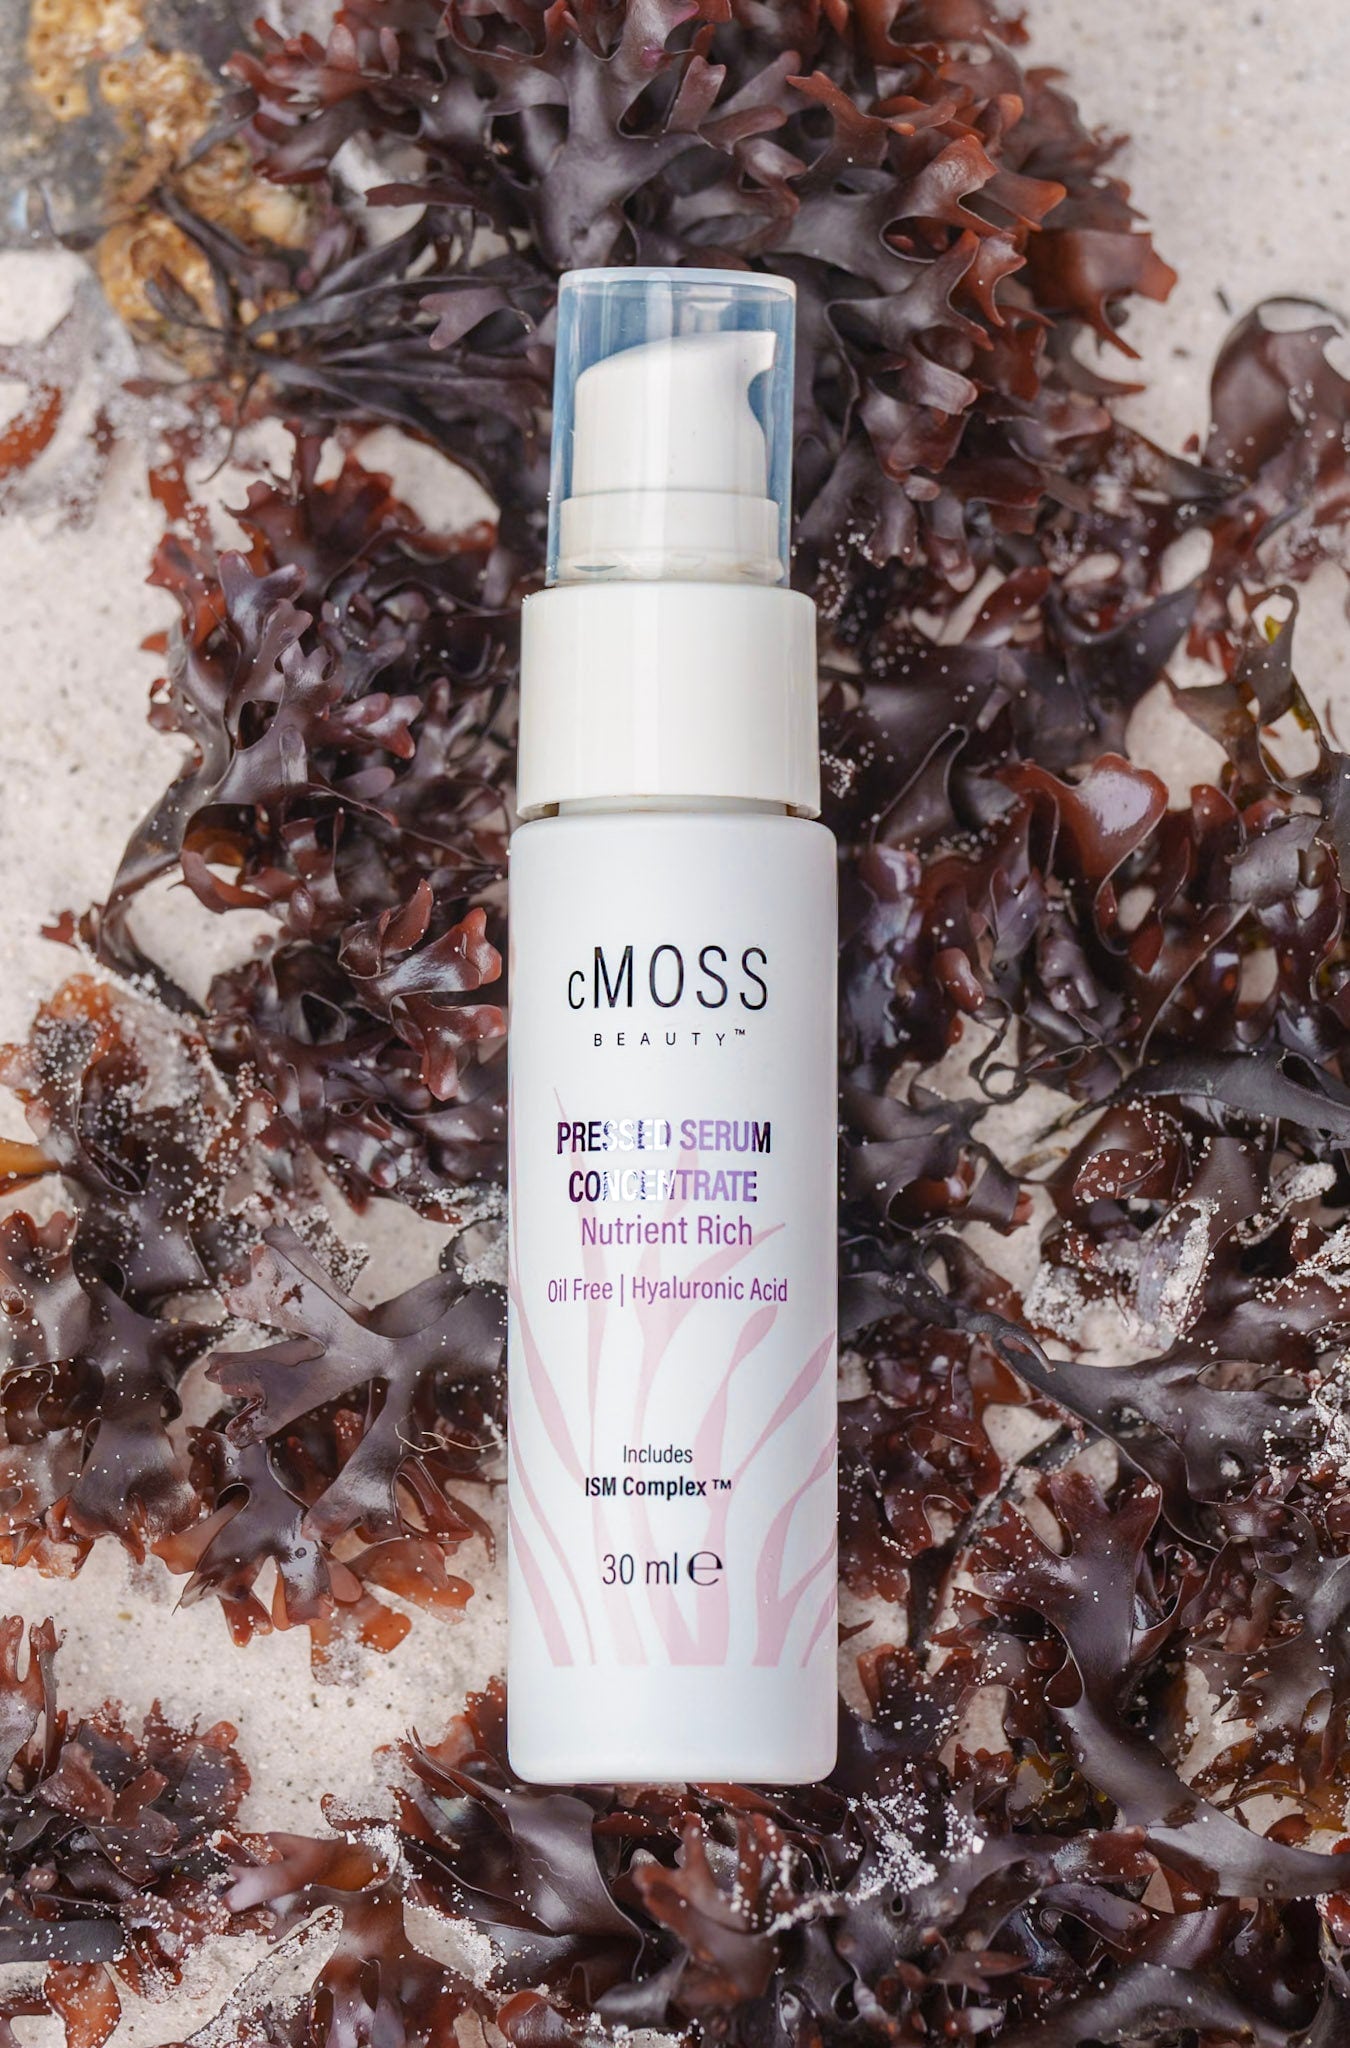 cmoss pressed serum concentrate over bed of irish sea moss